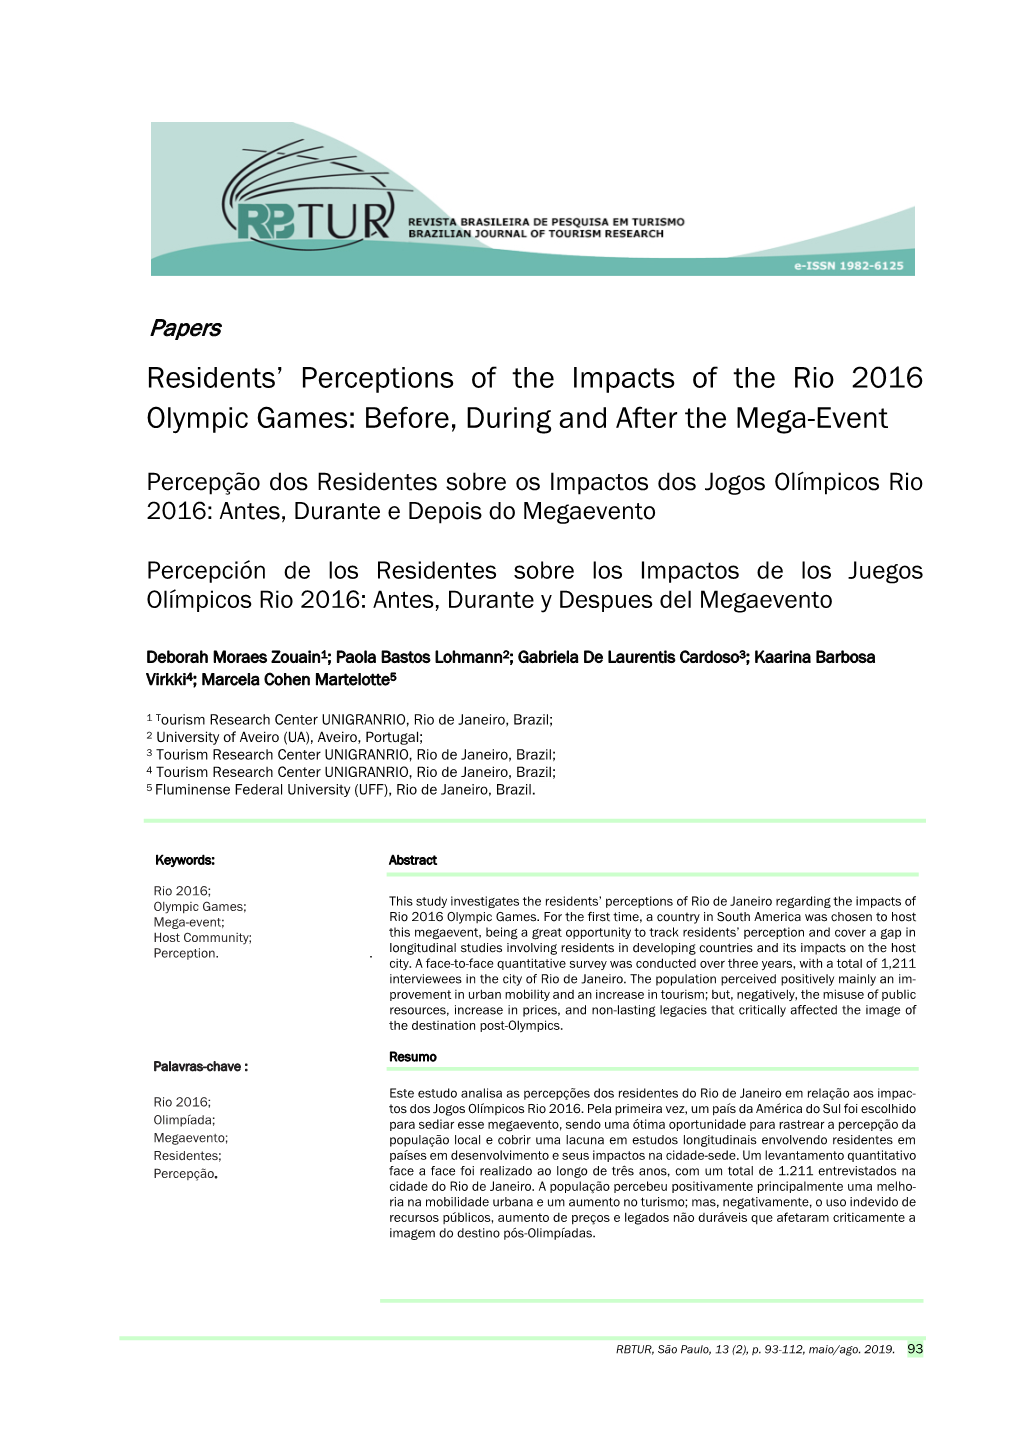 Residents' Perceptions of the Impacts of the Rio 2016 Olympic